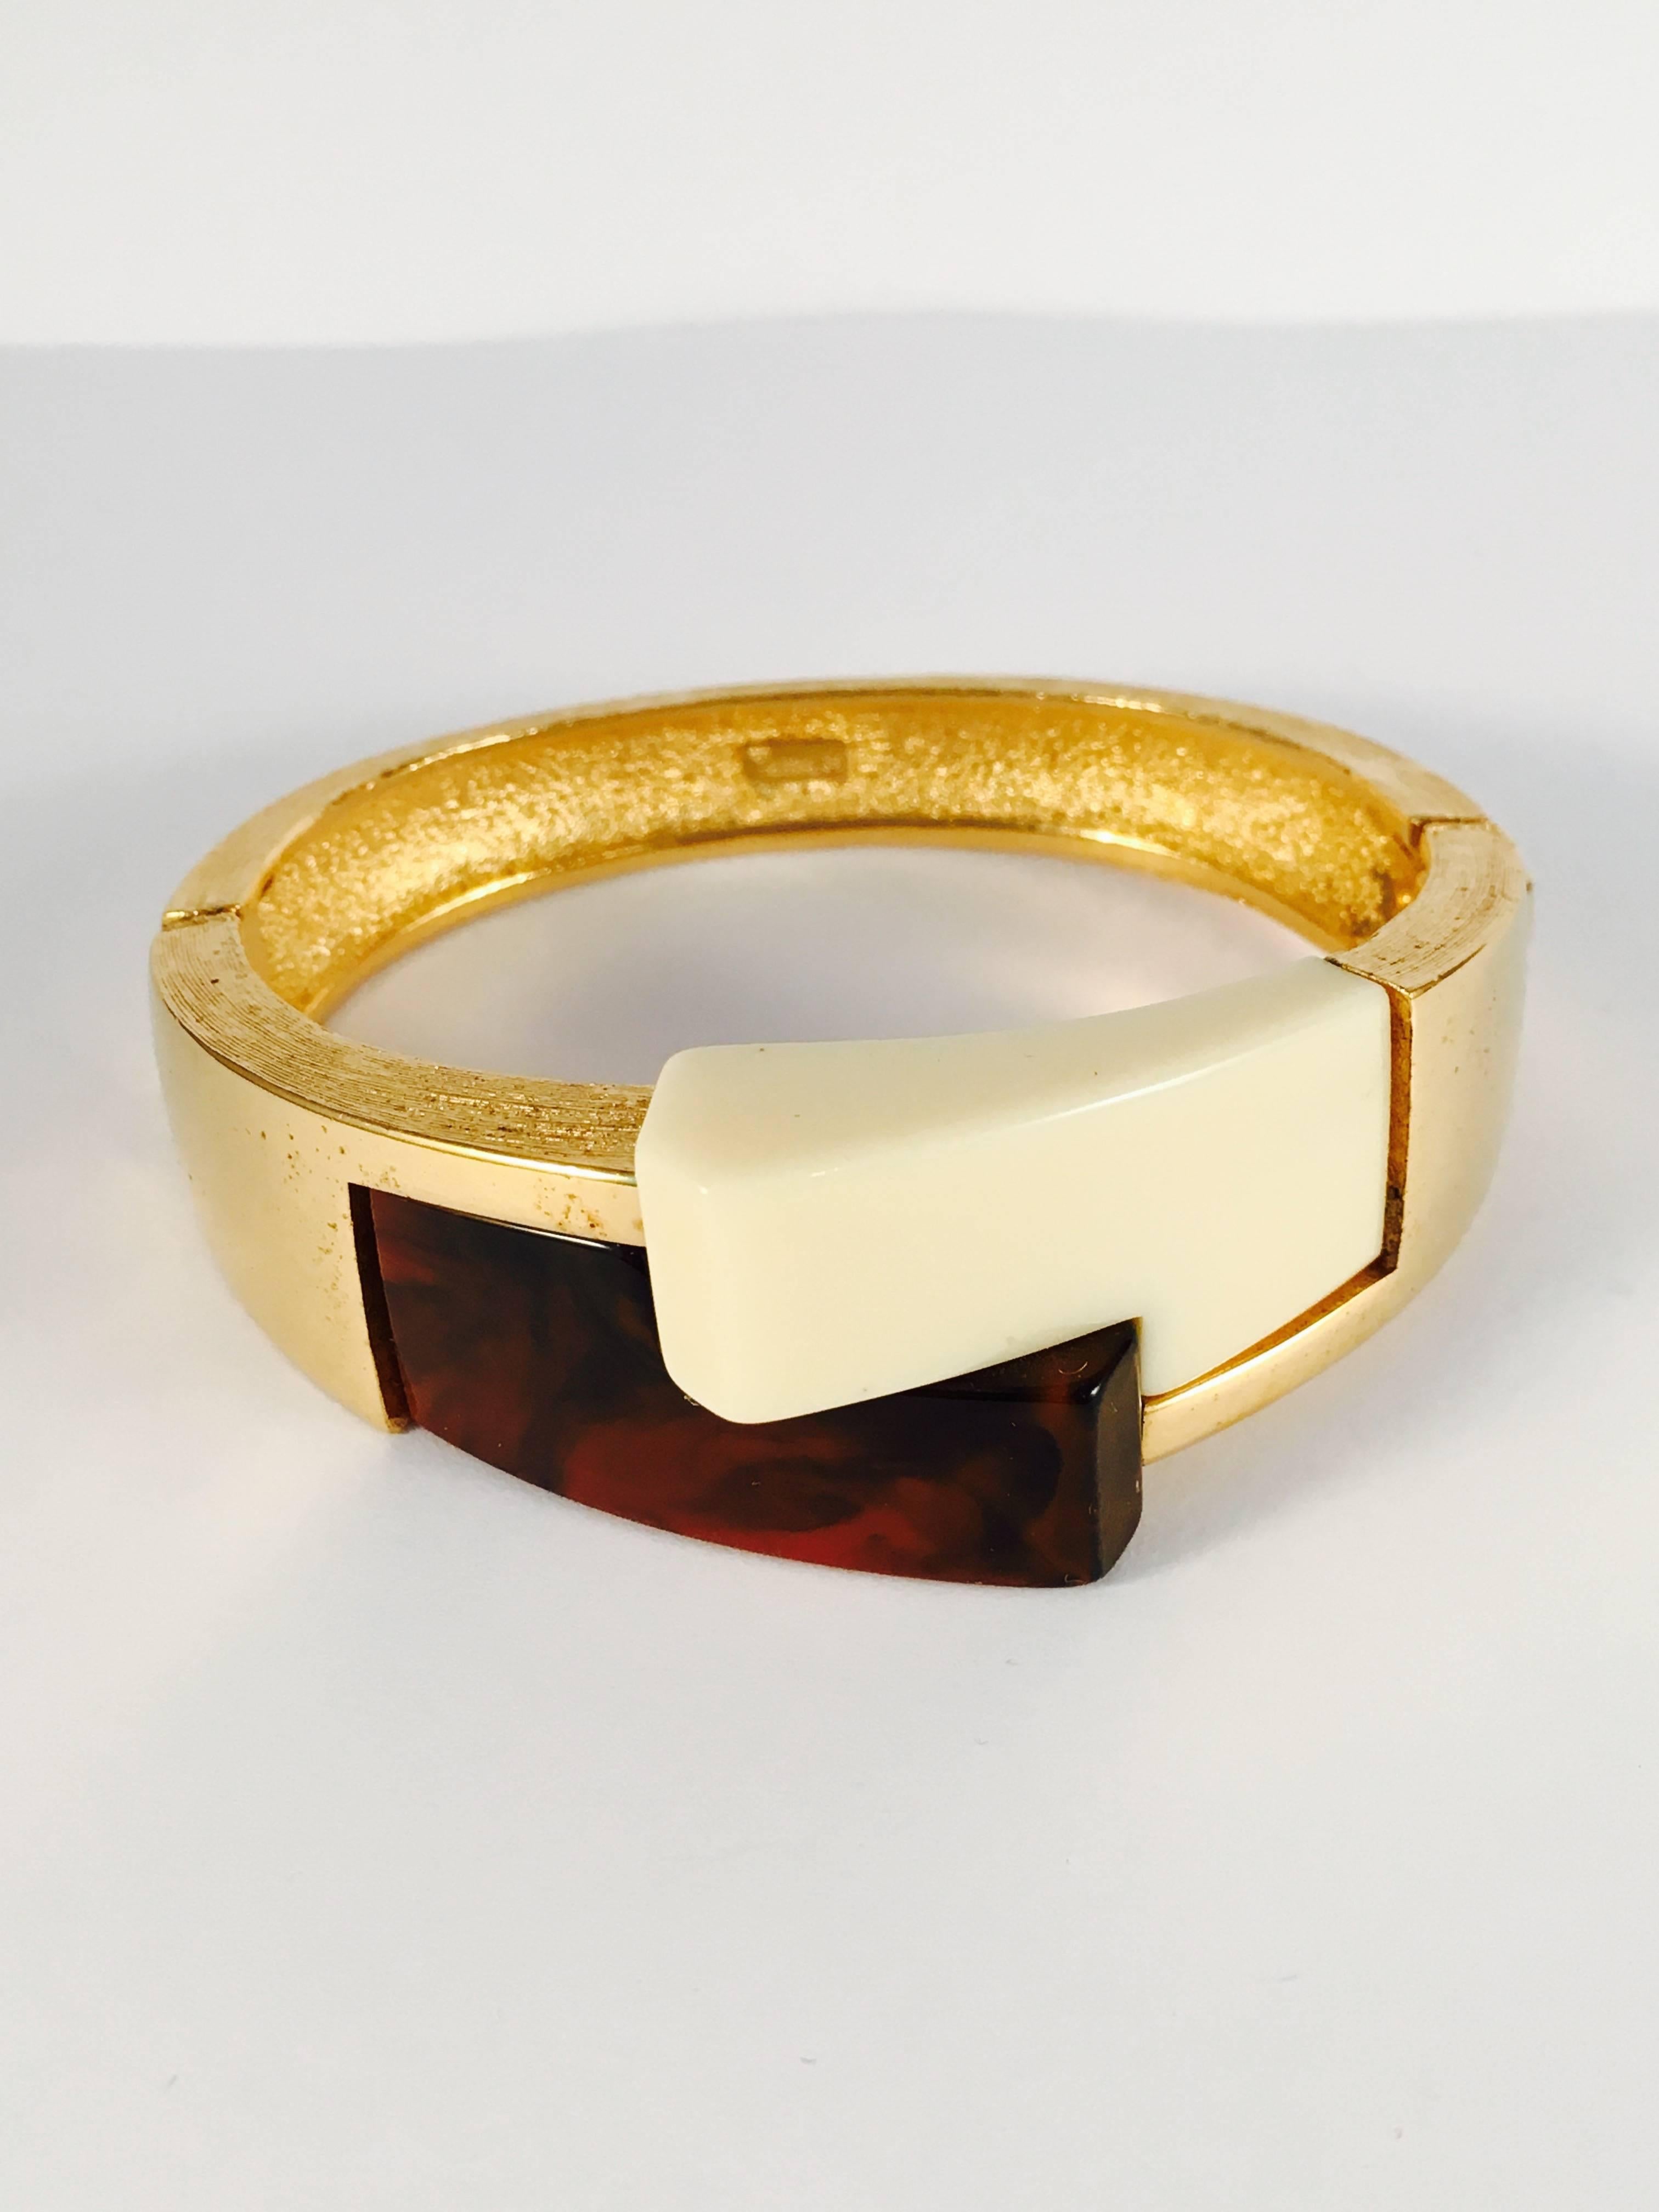 This is a 1970s Modernist bracelet by Trifari. It opens at the side and is made up of two resin modernist pieces at the front measuring 1